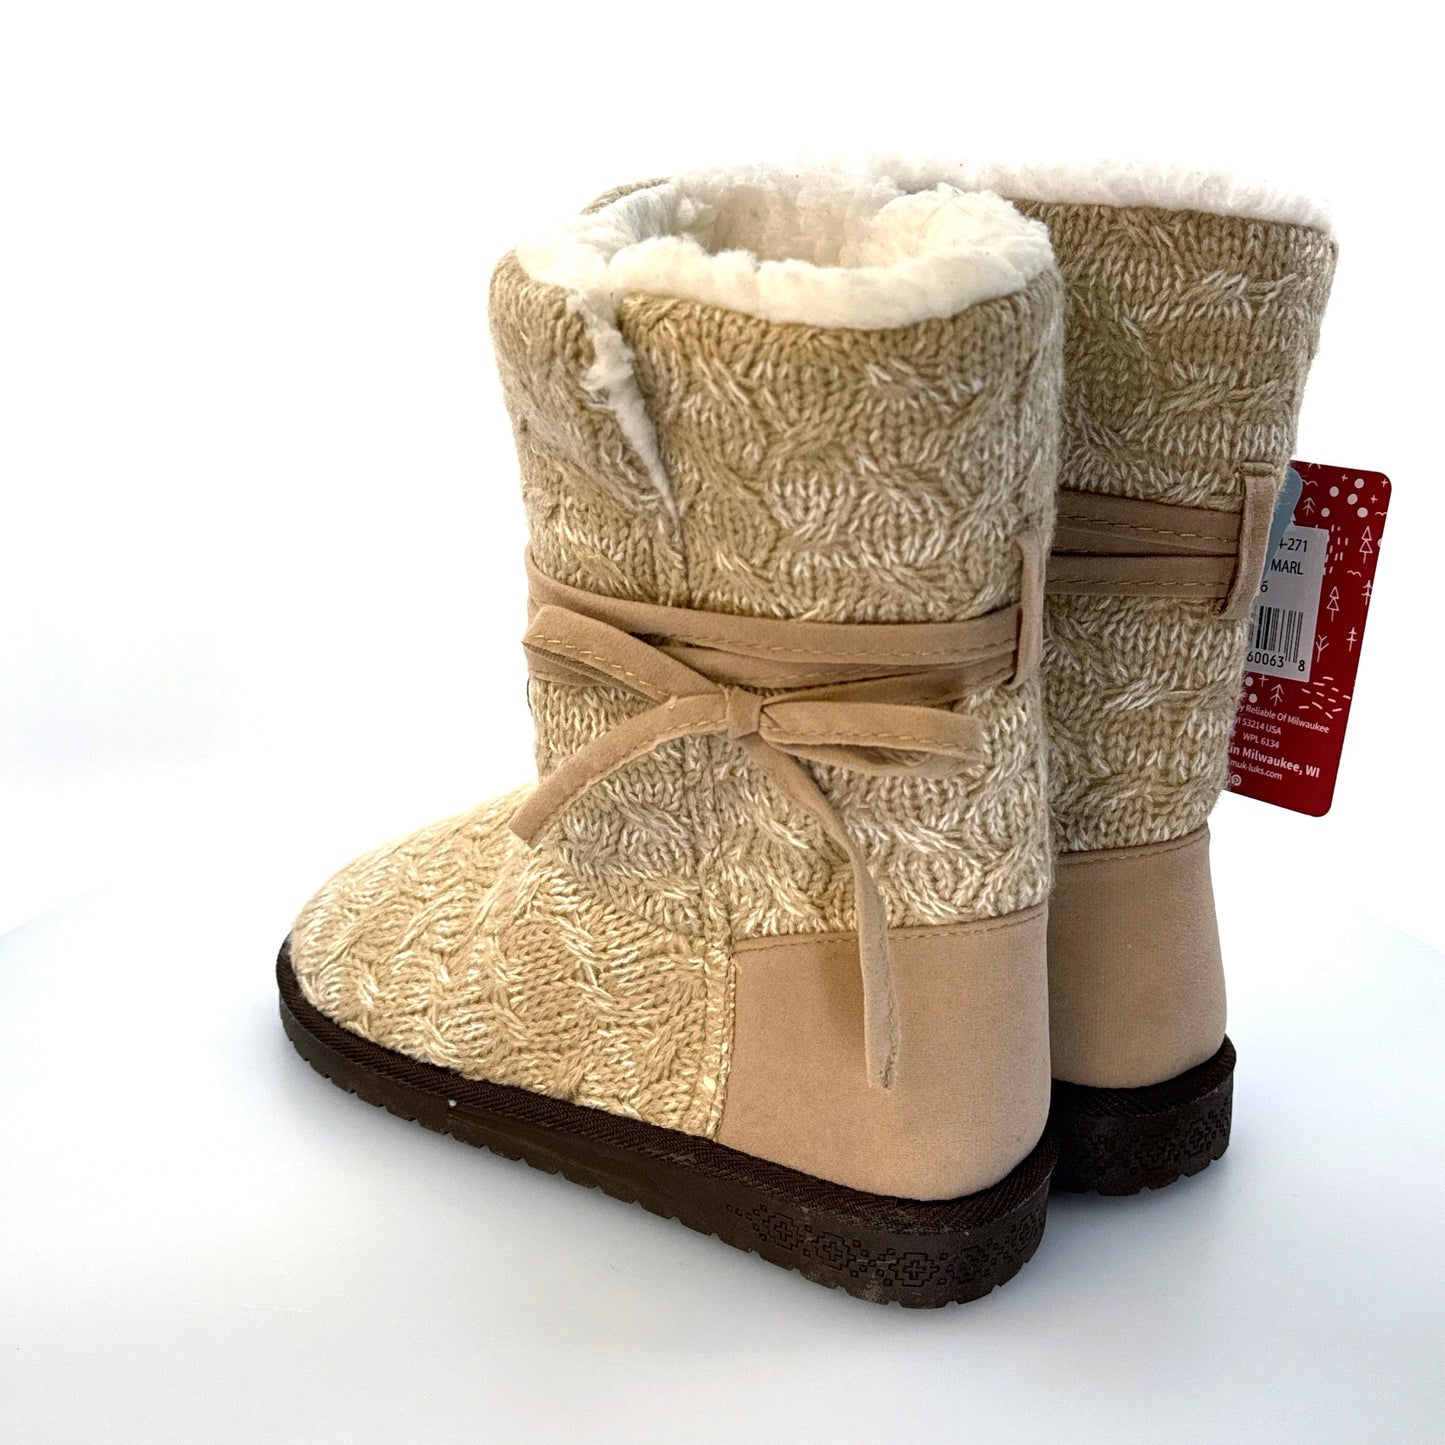 Muk Luks Essentials | Womens Clementine Boot | Color: Beige/Fawn Marl | Size: 6 | NWT